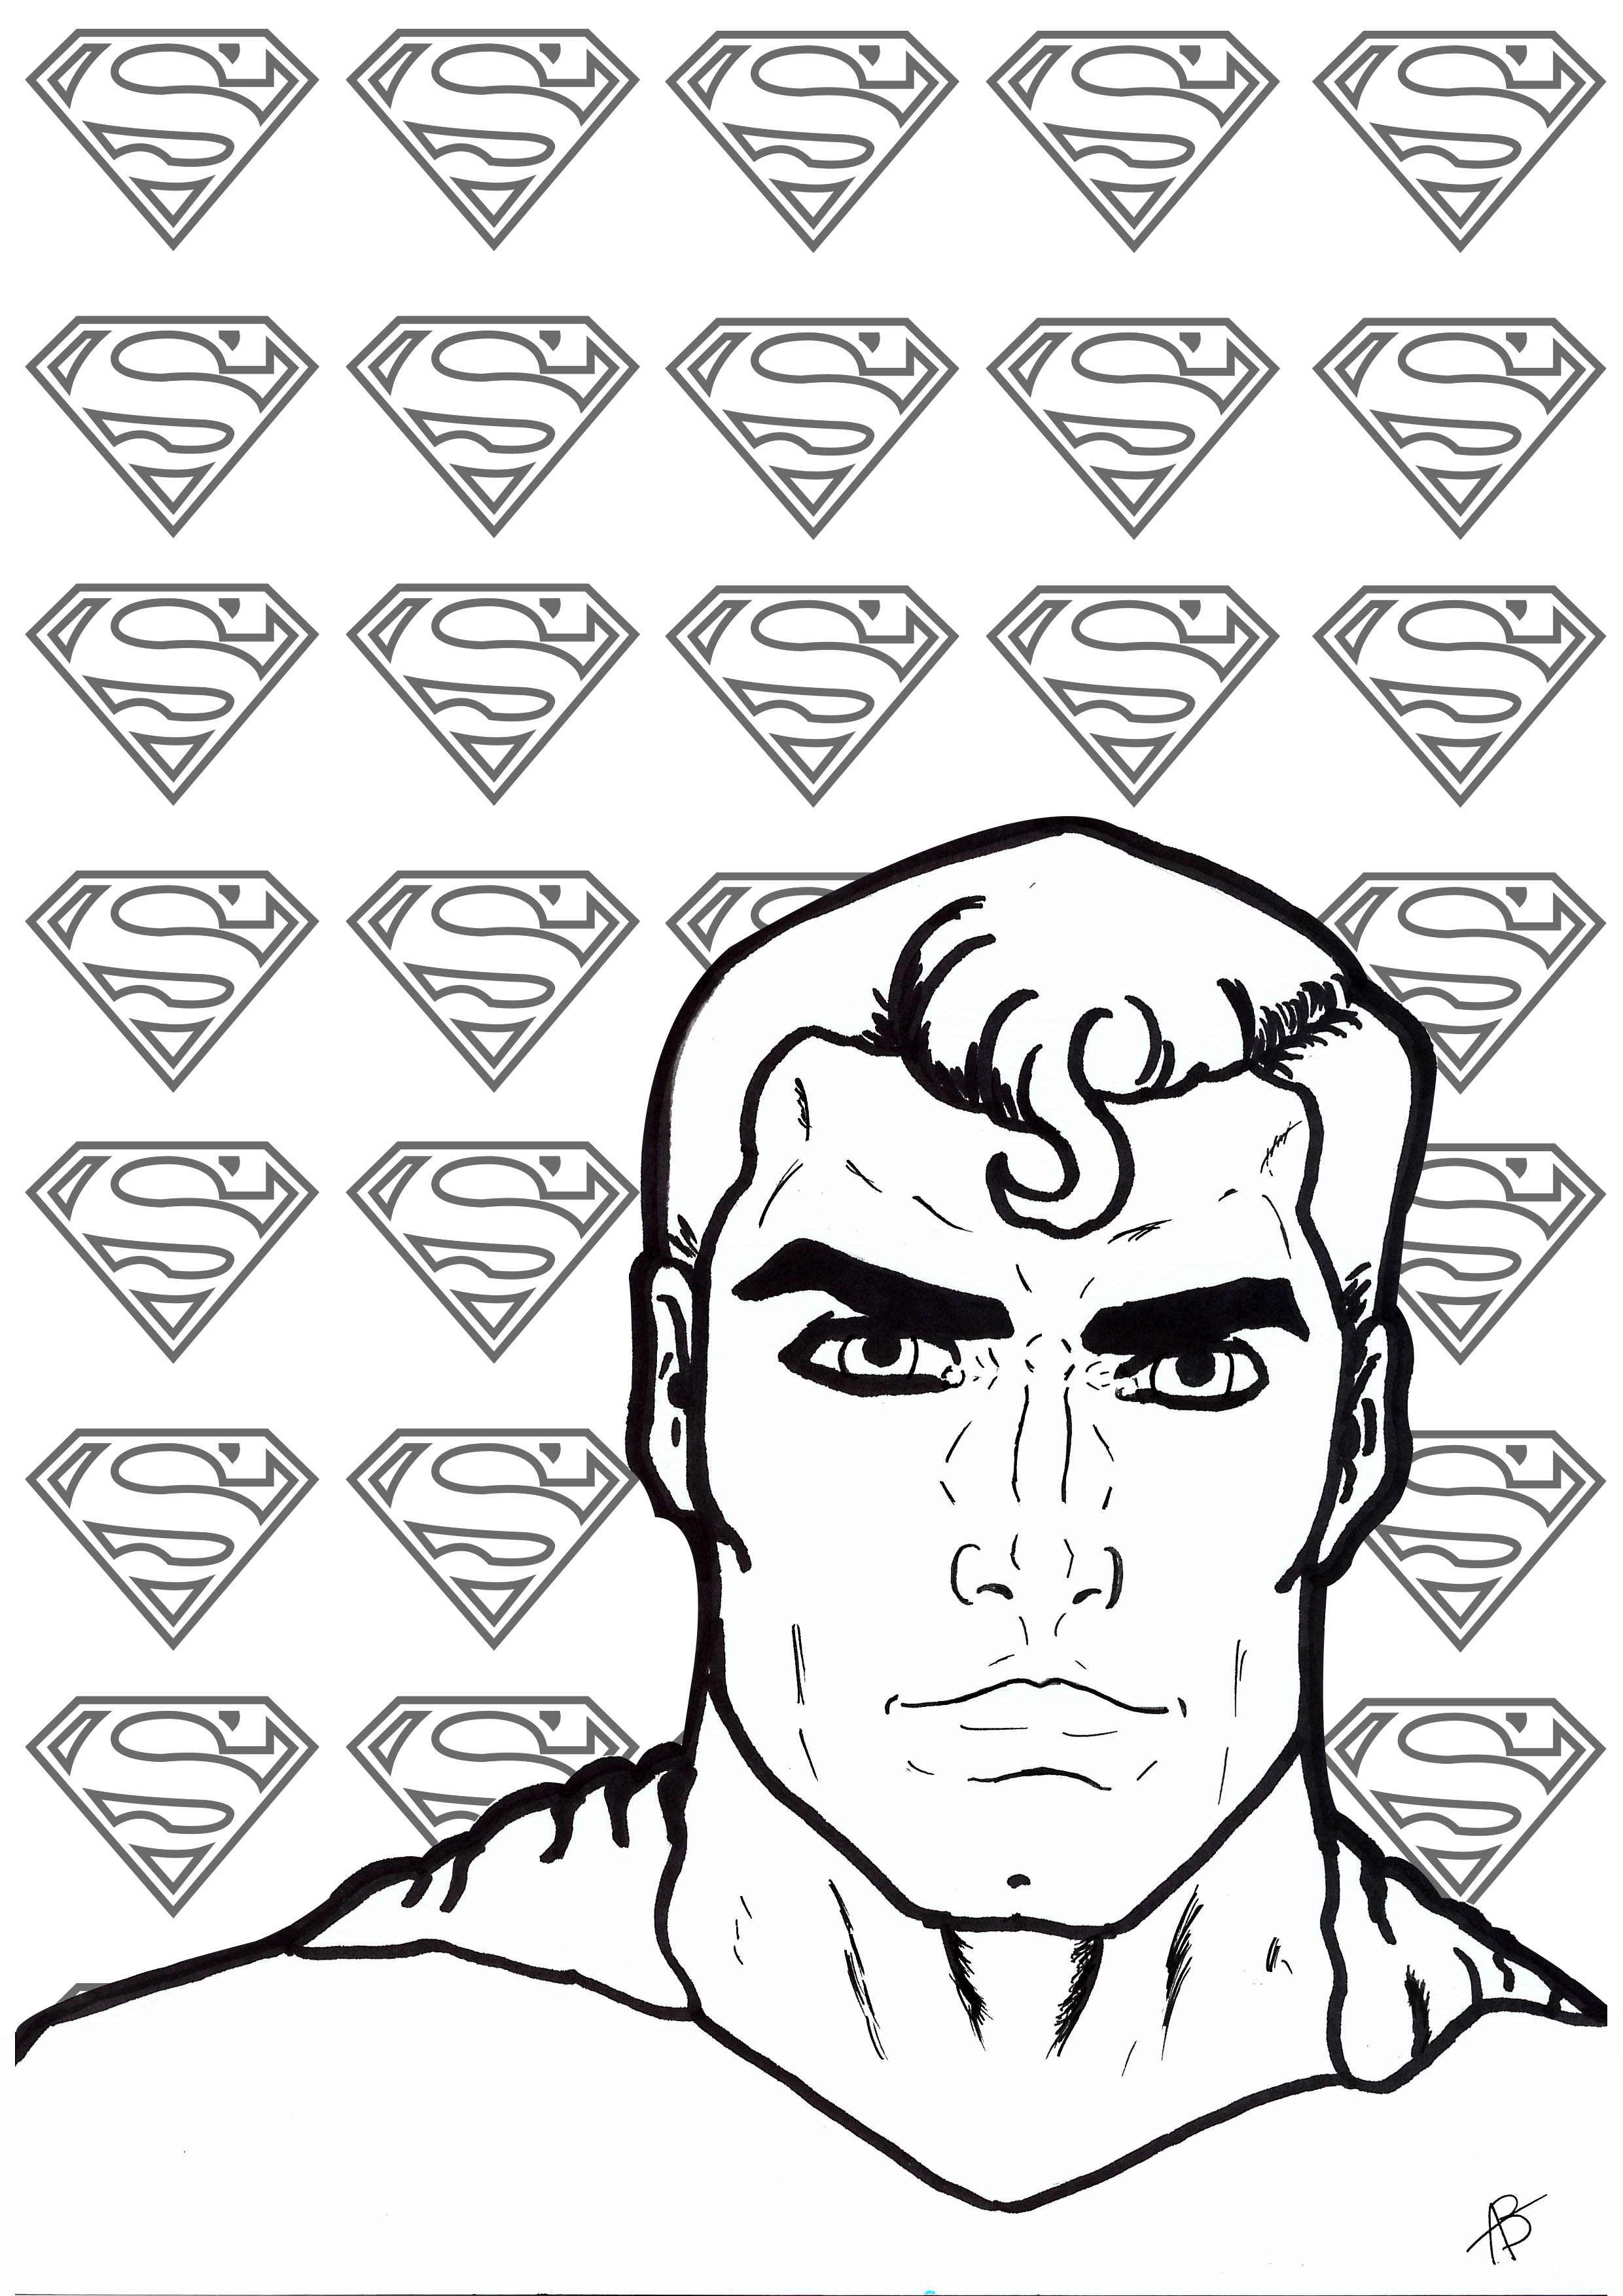 Coloring page inspired by Superman (DC Comics character)